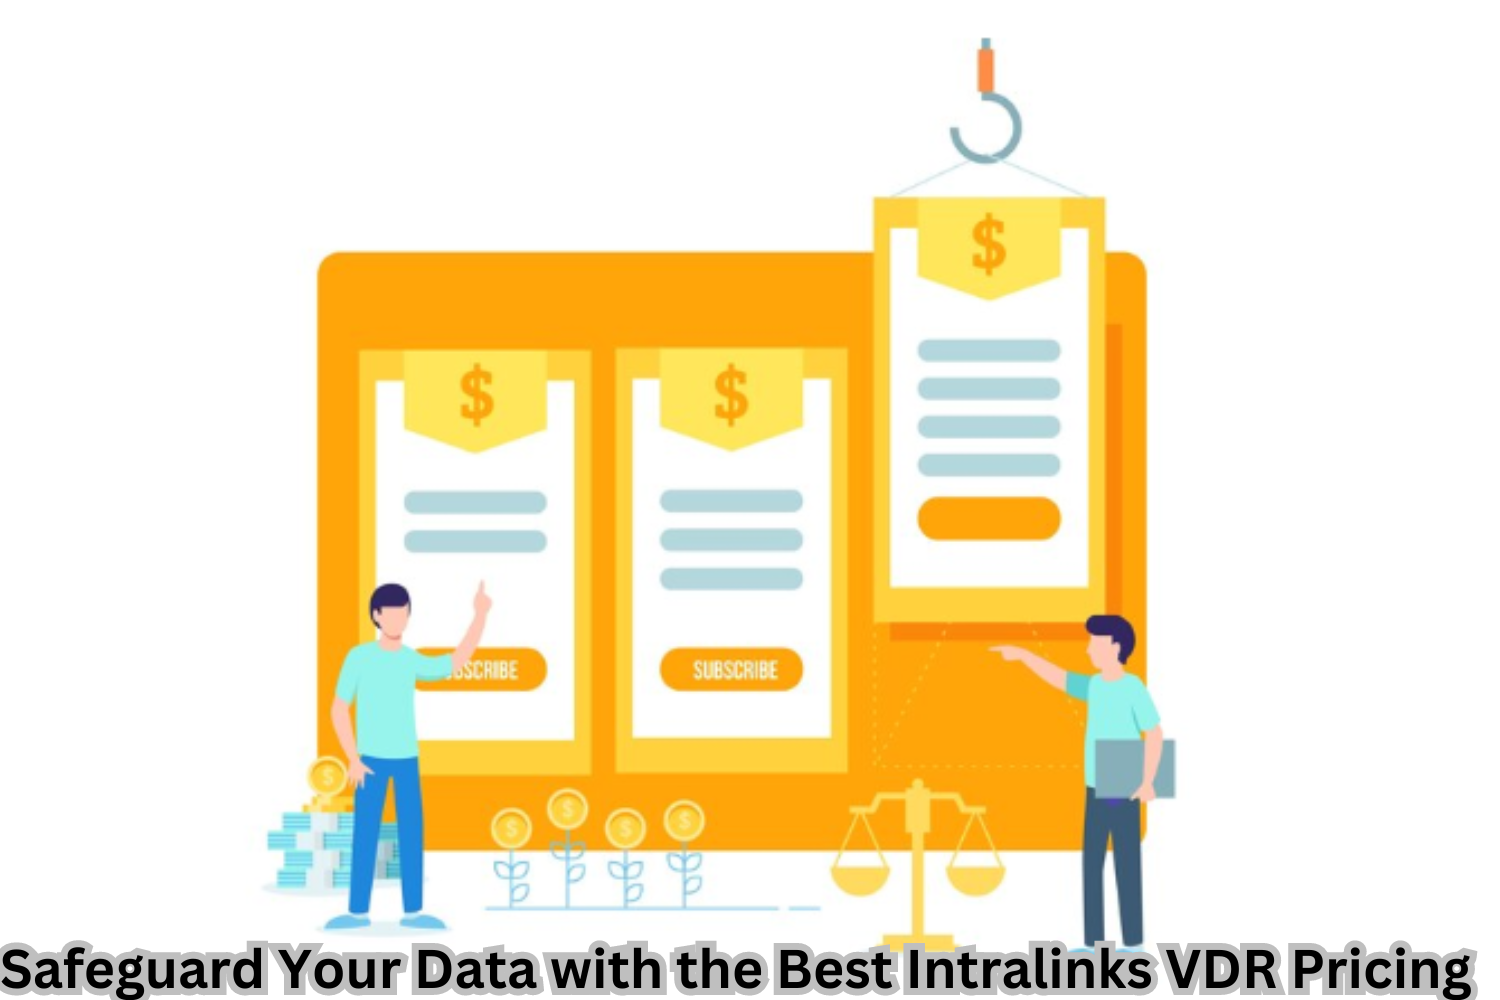 Intralinks VDR Pricing Dashboard Showing User Licenses and Storage Options